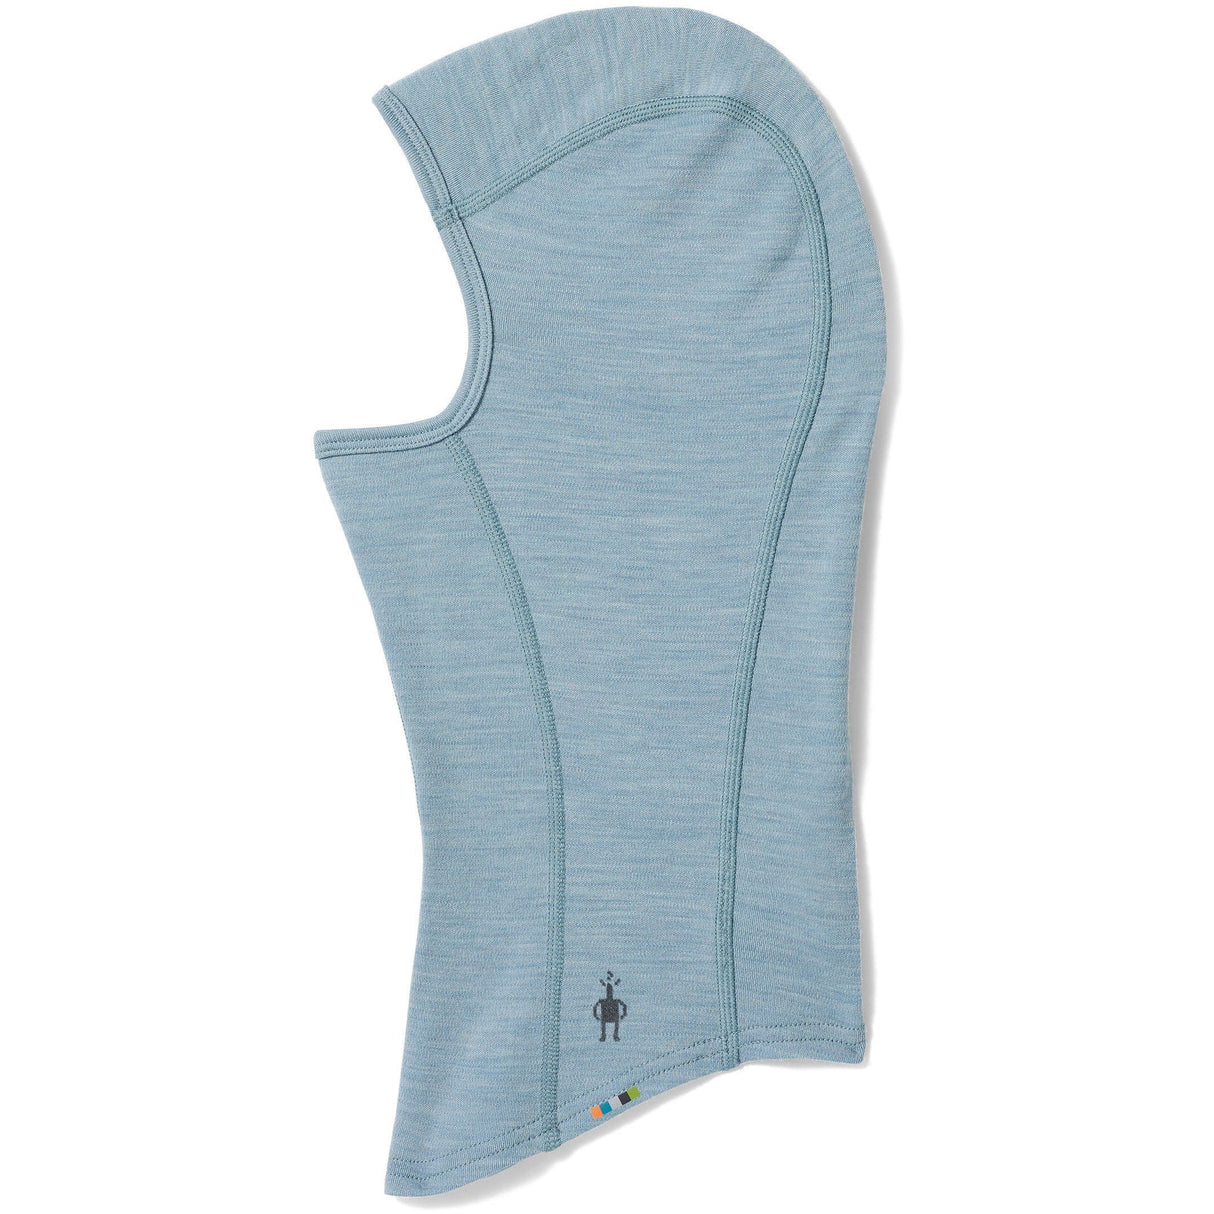 Smartwool Thermal Balaclava  -  One Size Fits Most / Lead Heather